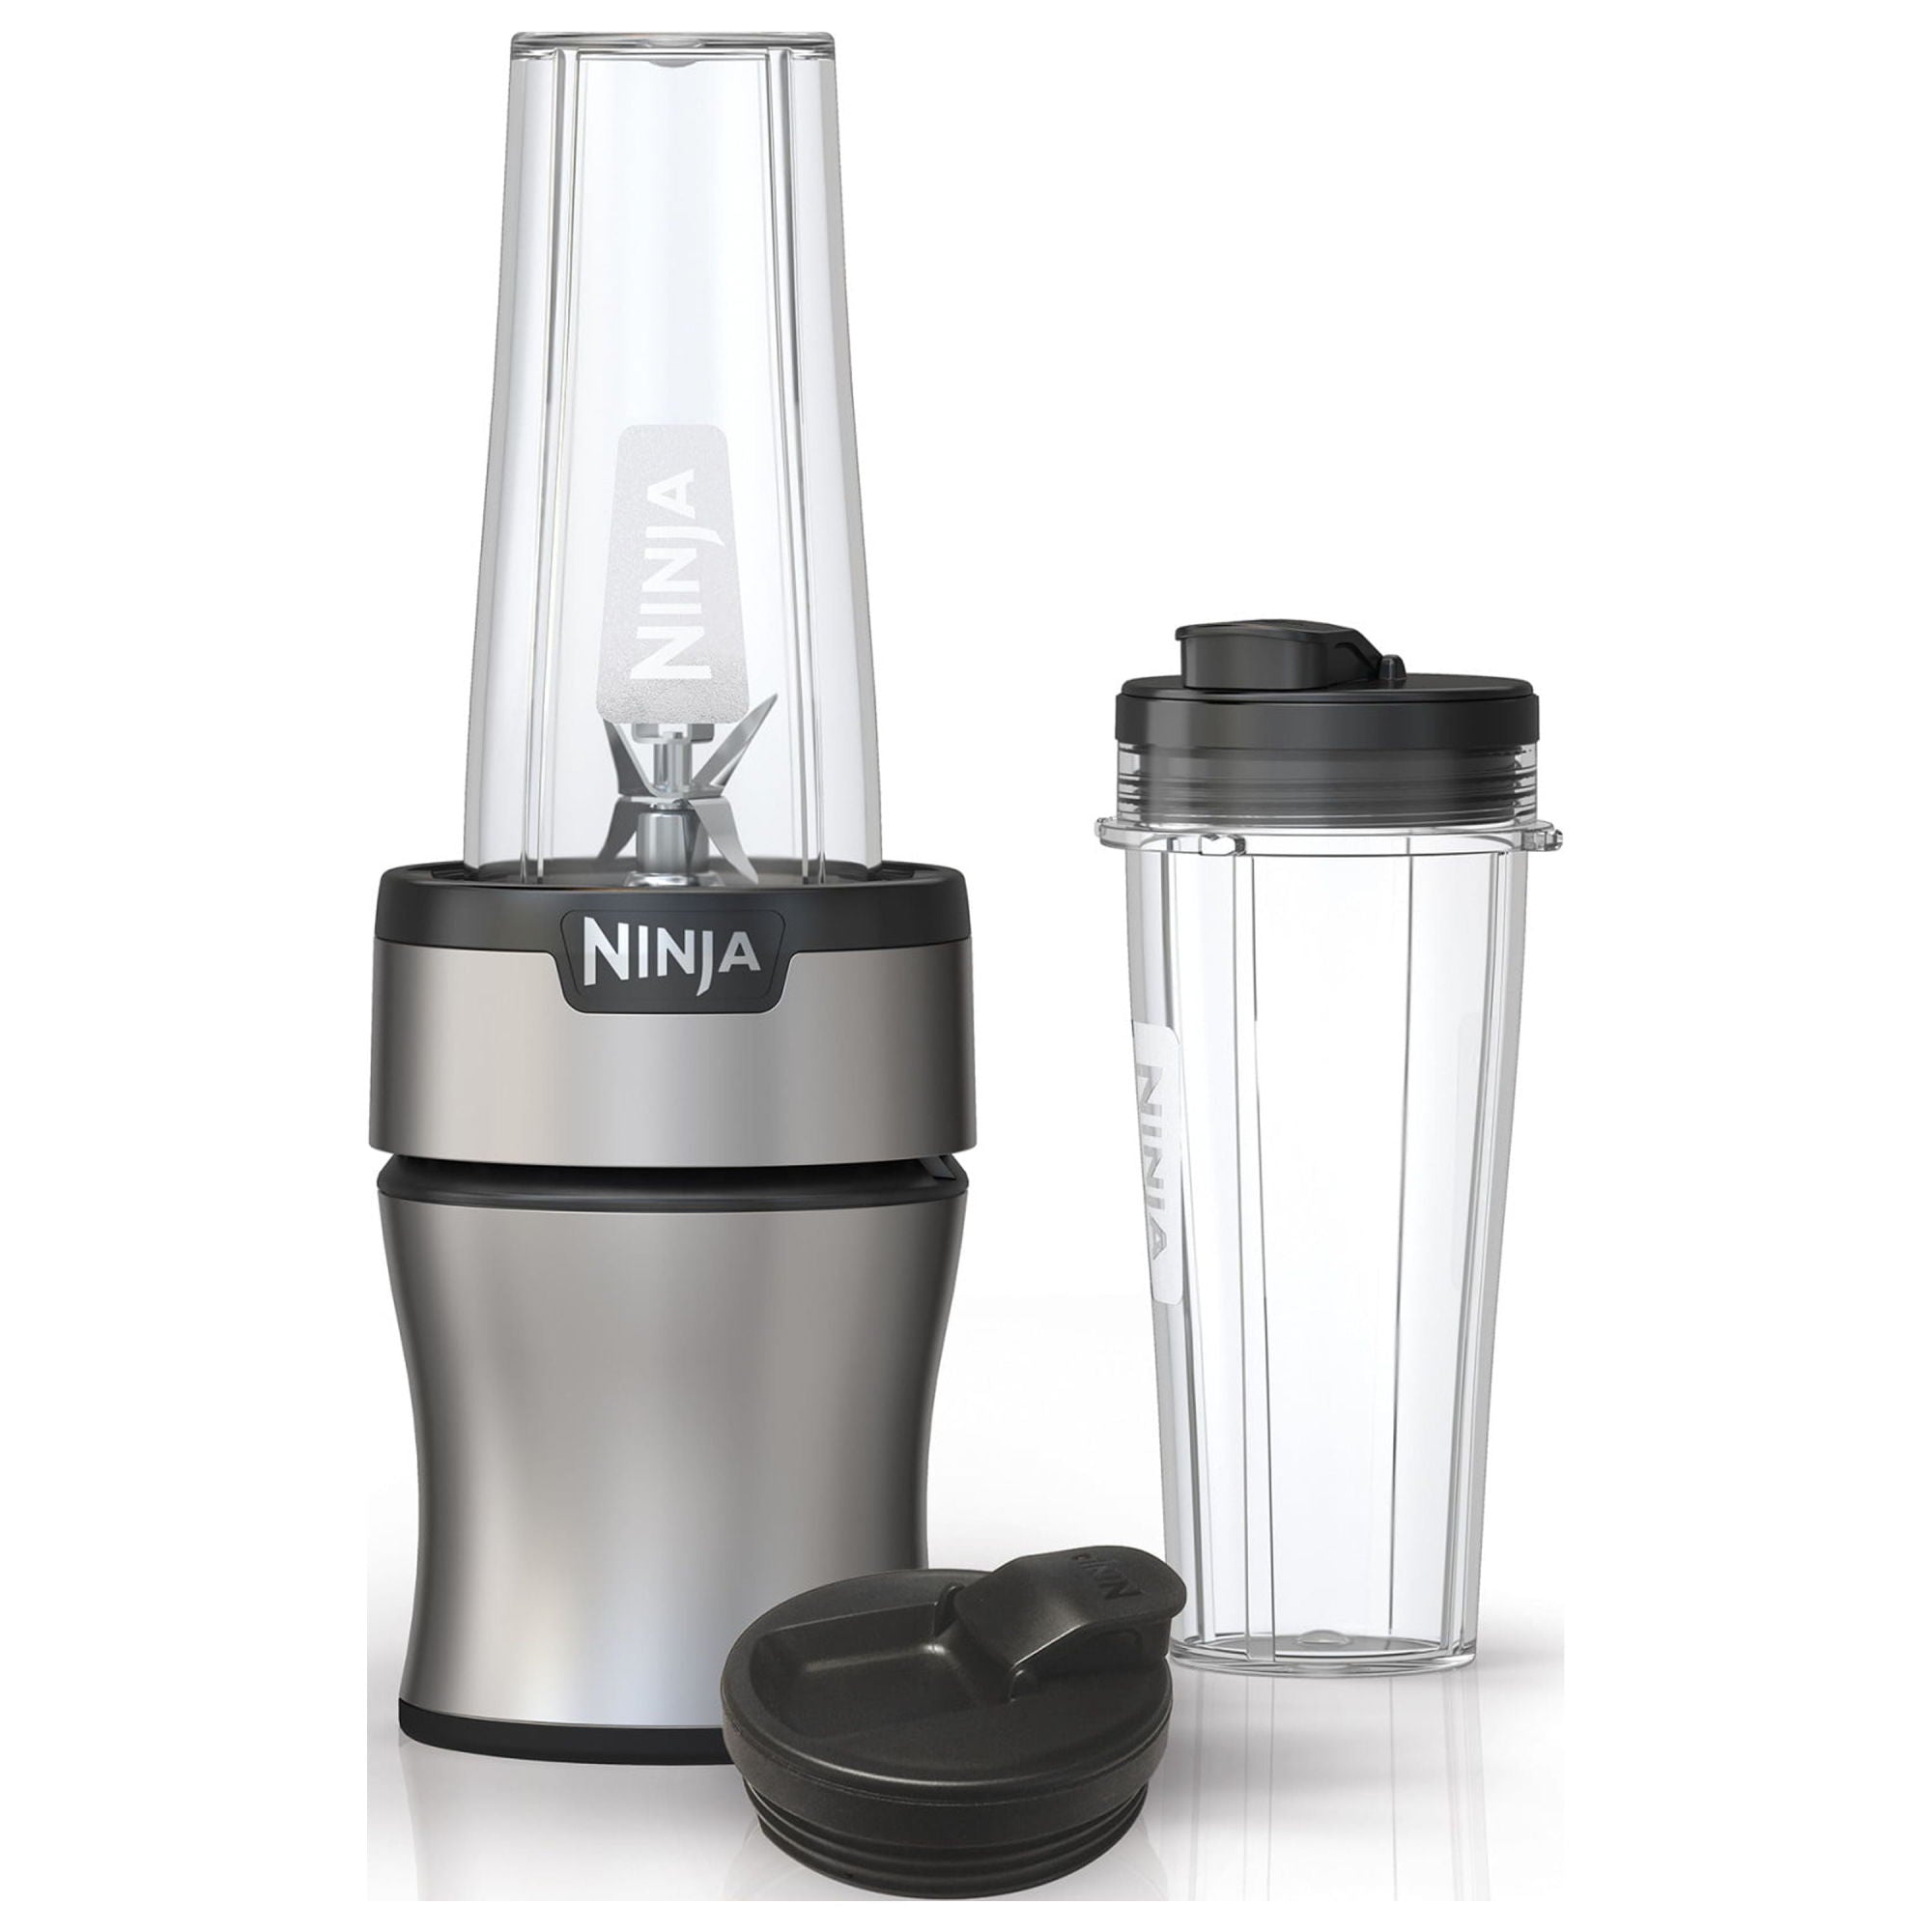 A Nutri-Blender BN300 700-Watt Personal Blender, 2 20 oz Dishwasher-Safe To-Go Cups with a cup and a lid, perfect for making smoothies.